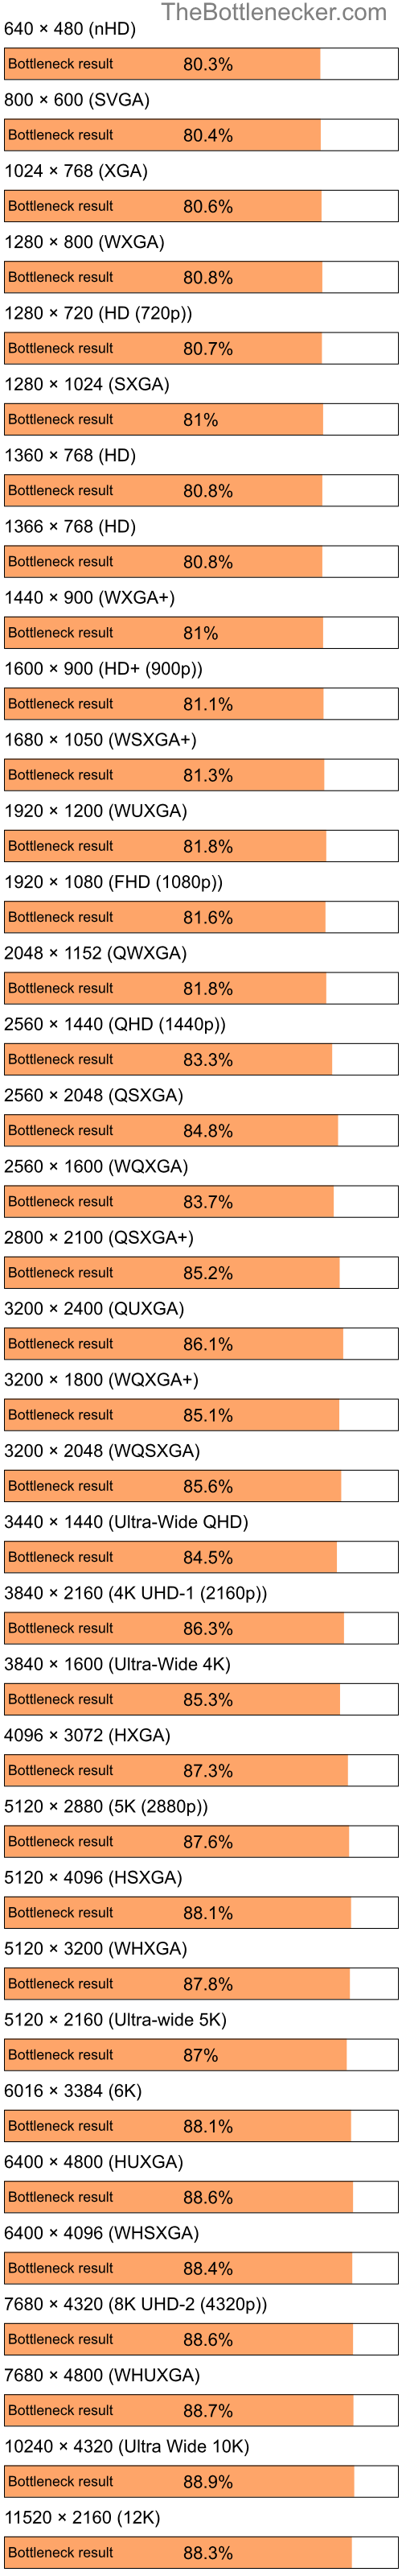 Bottleneck results by resolution for Intel Atom Z520 and NVIDIA GeForce 6200 in Graphic Card Intense Tasks